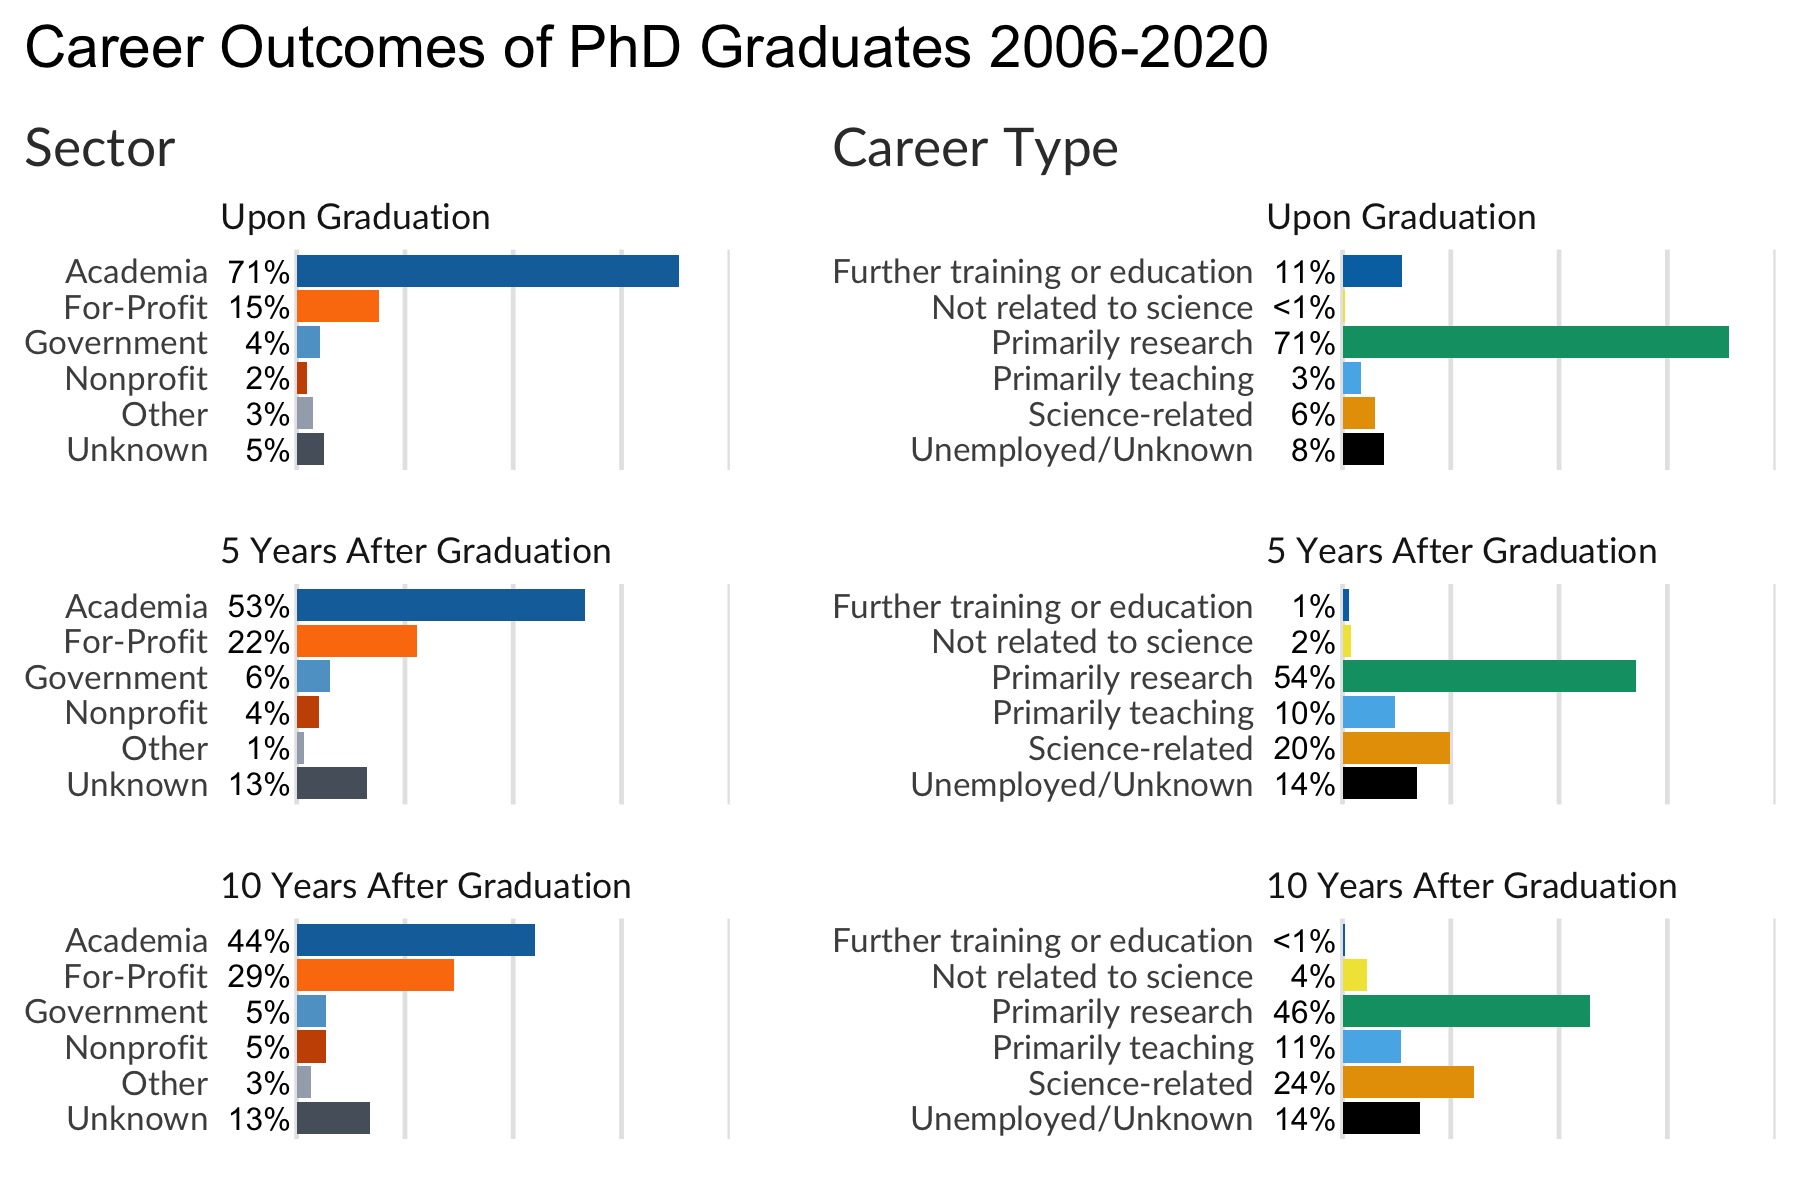 School of Medicine PhD graduate career outcomes summary by sector and career type